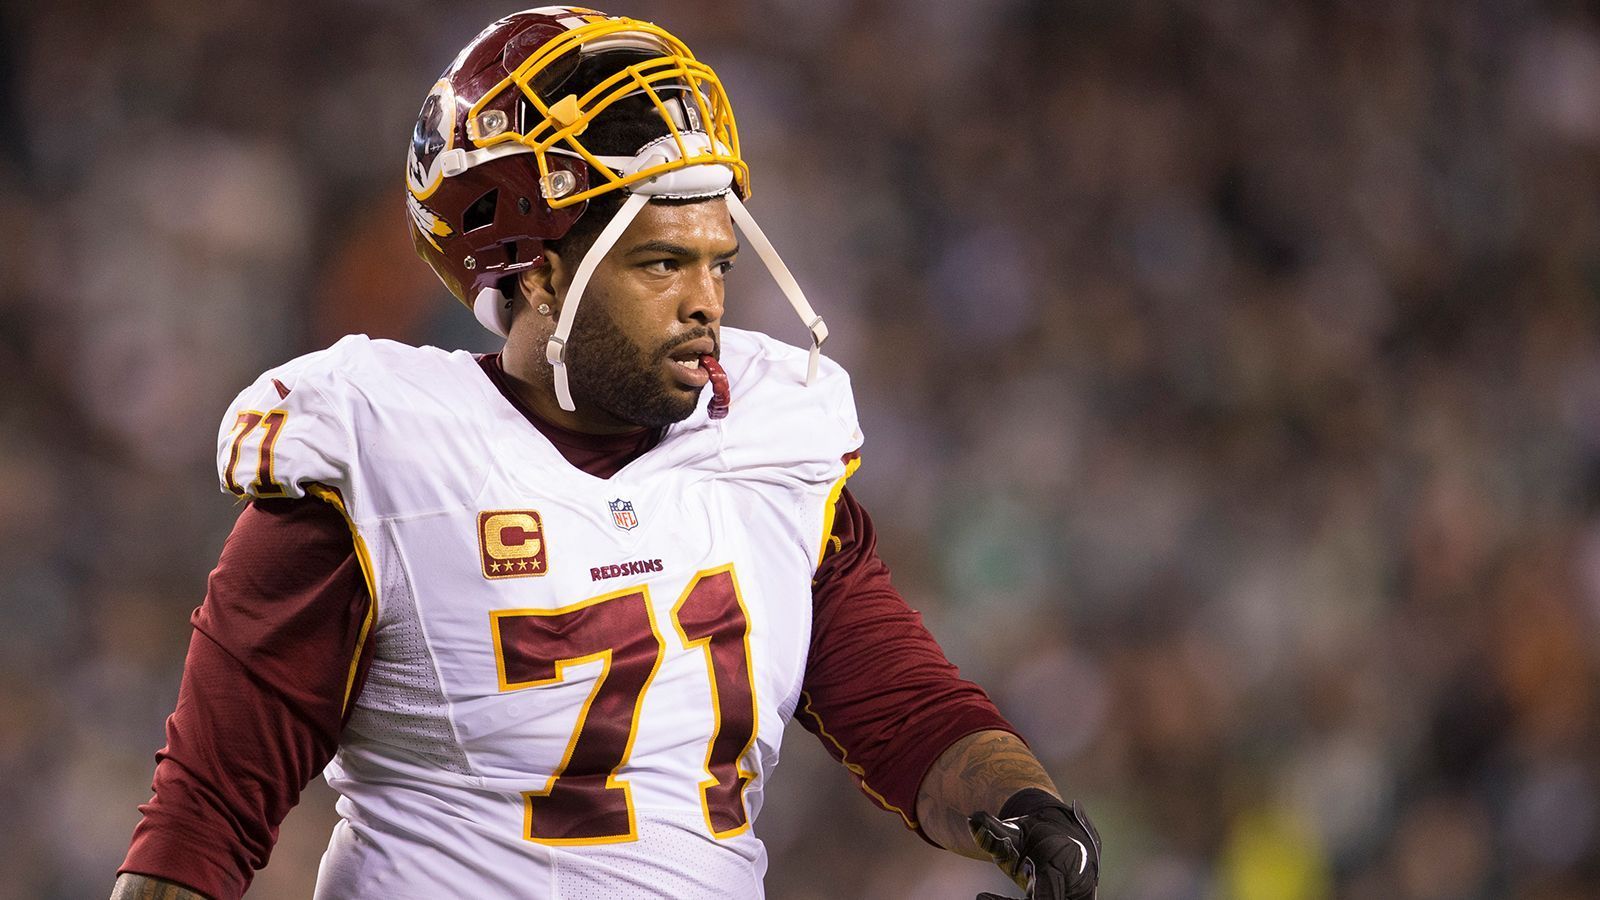 
                <strong>Trent Williams (Washington Redskins)</strong><br>
                Gesamtwertung: 95Position: Offensive Tackle
              